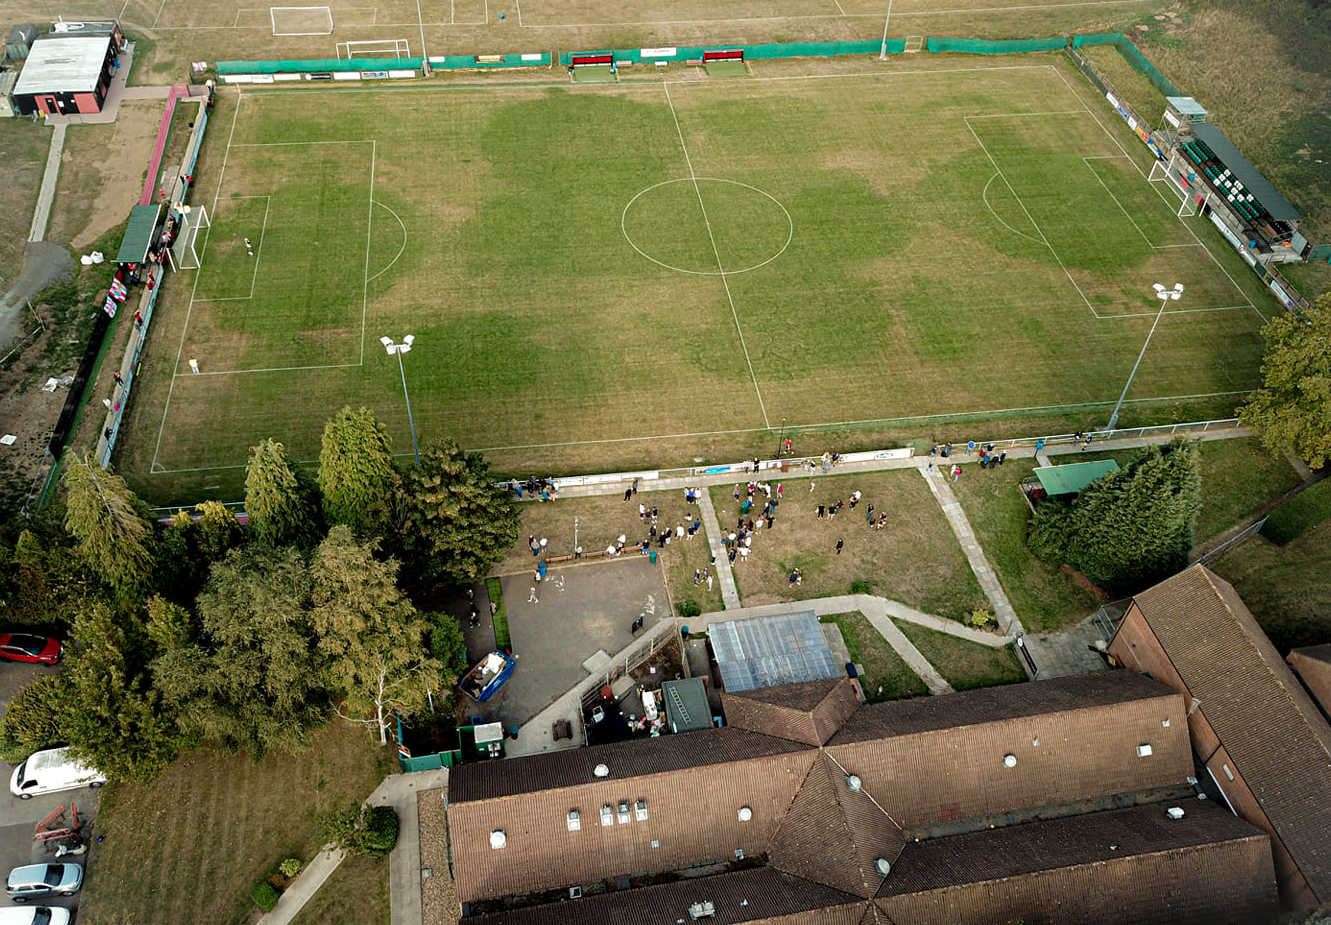 City will play at Sittingbourne's Woodstock ground from next season